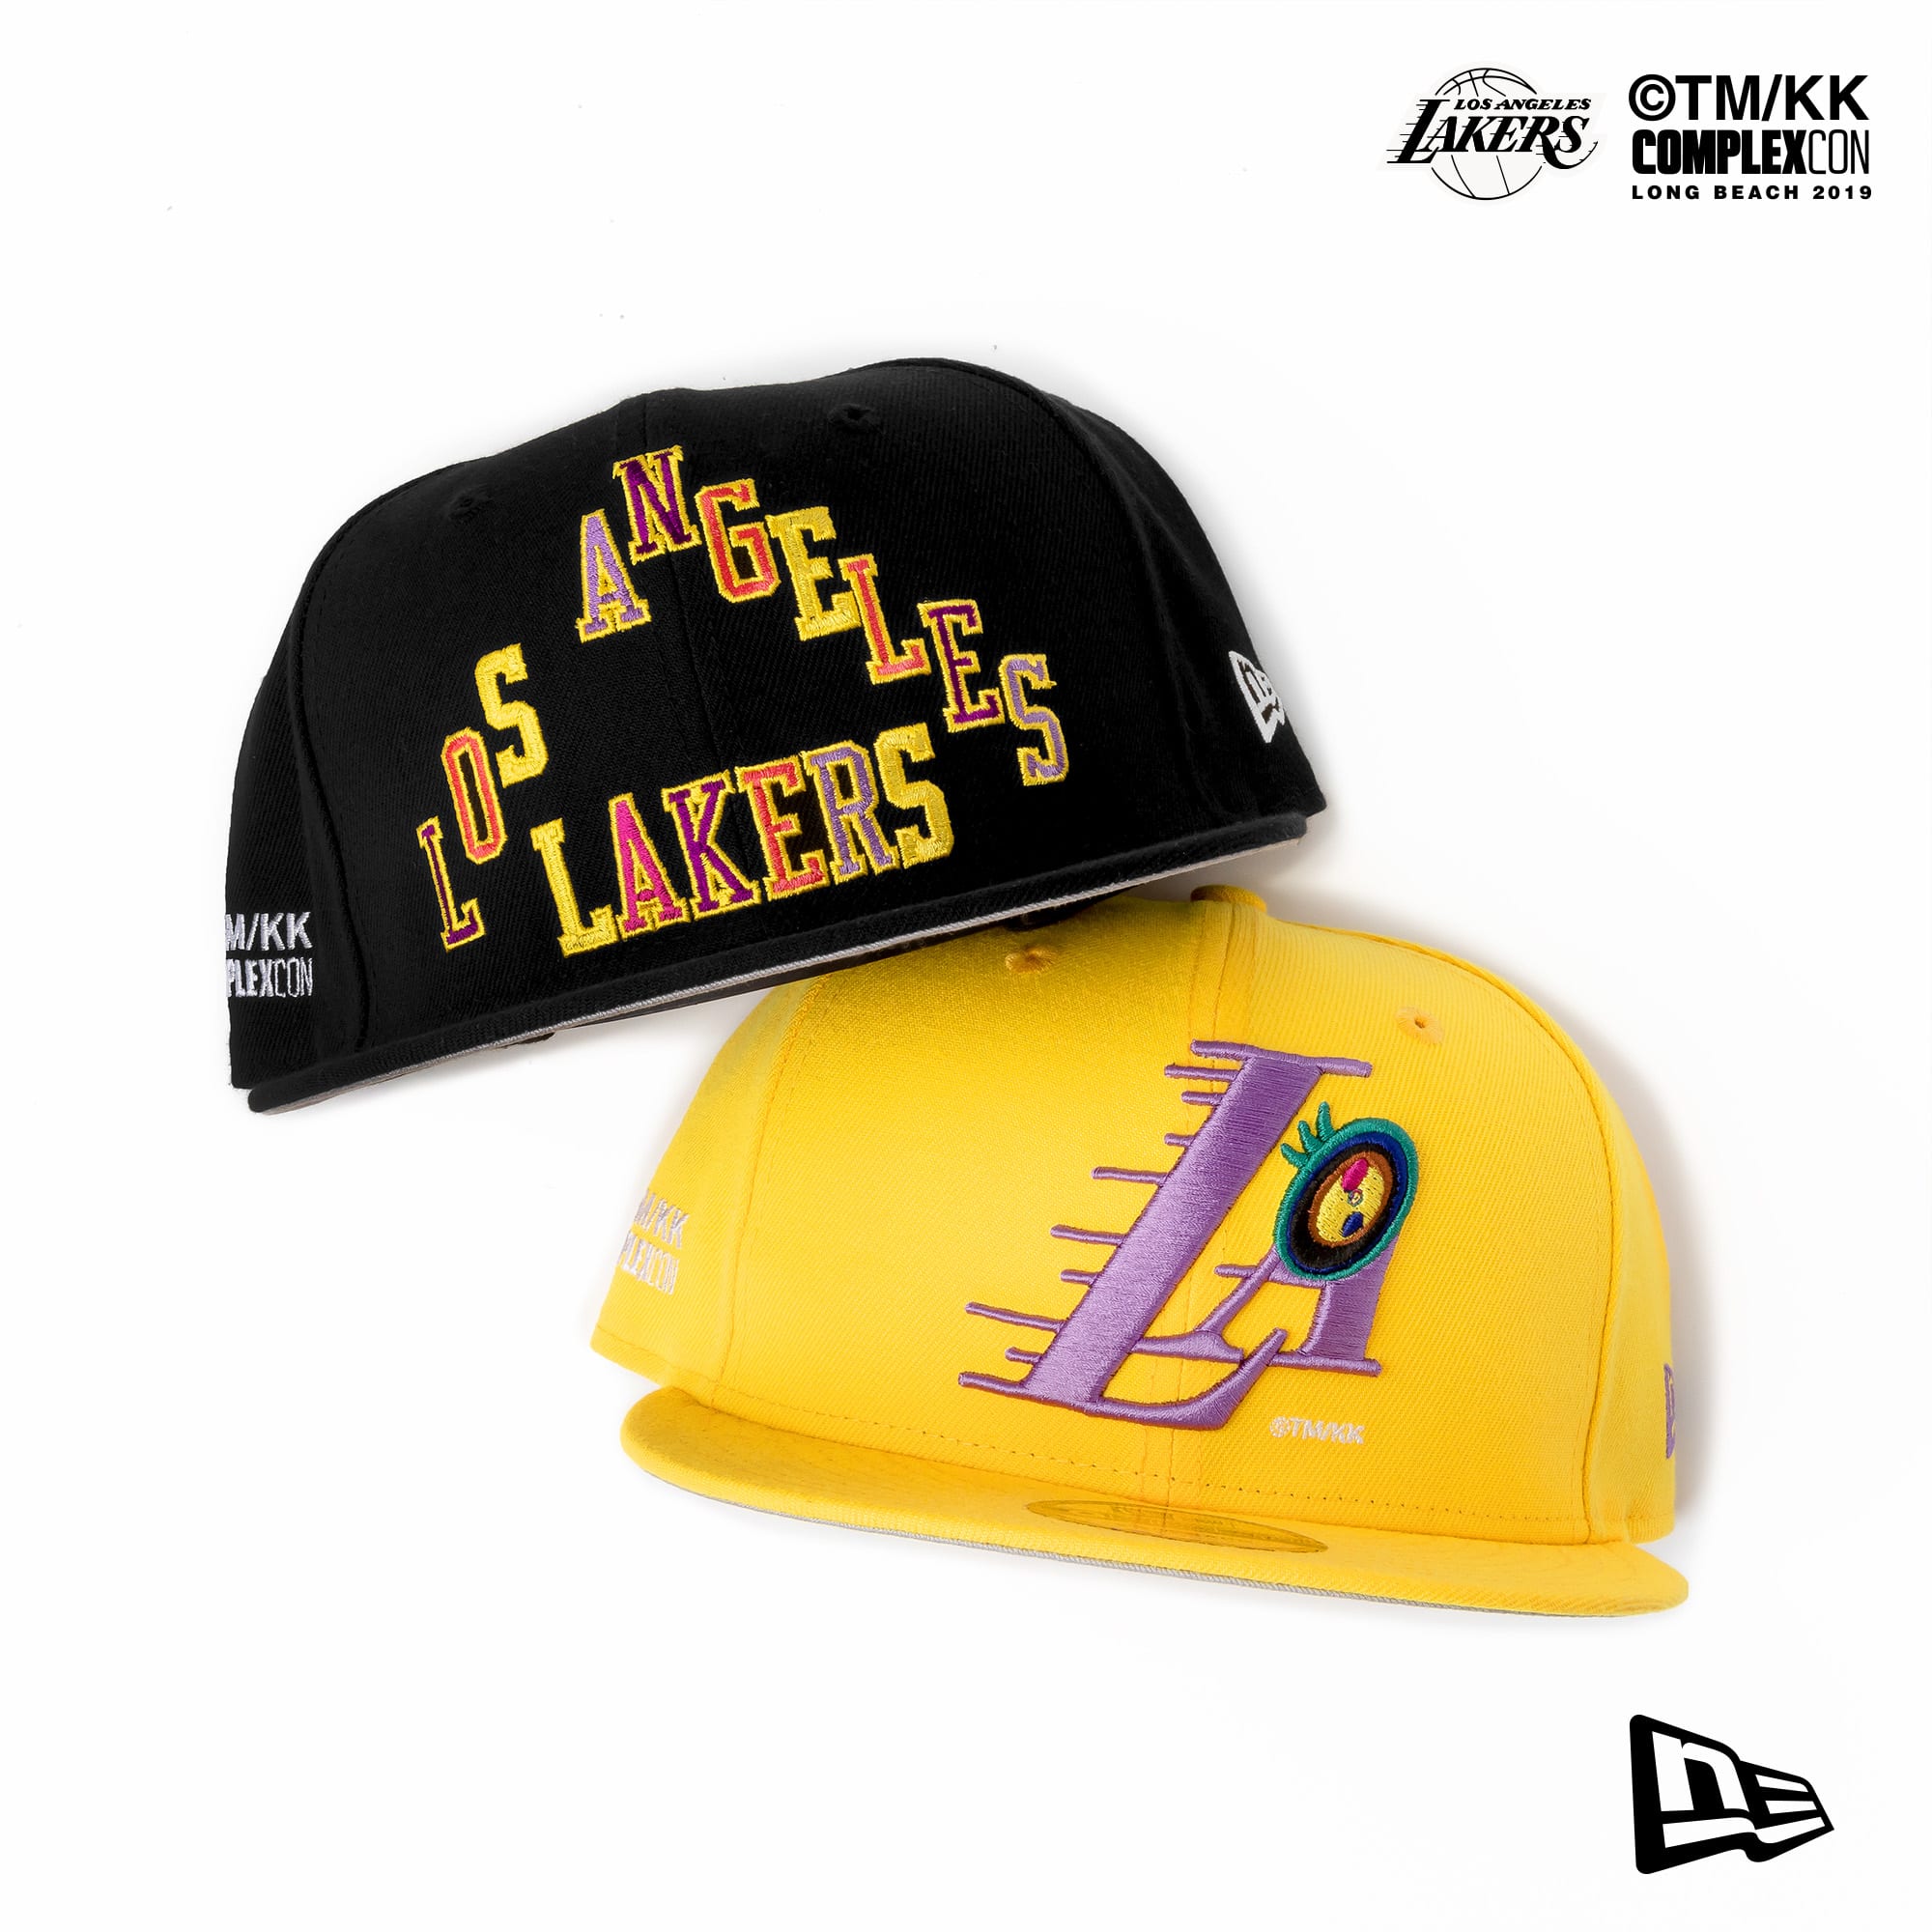 New Era Hats by Takashi Murukami, The Lakers, and New Era for Complexcon